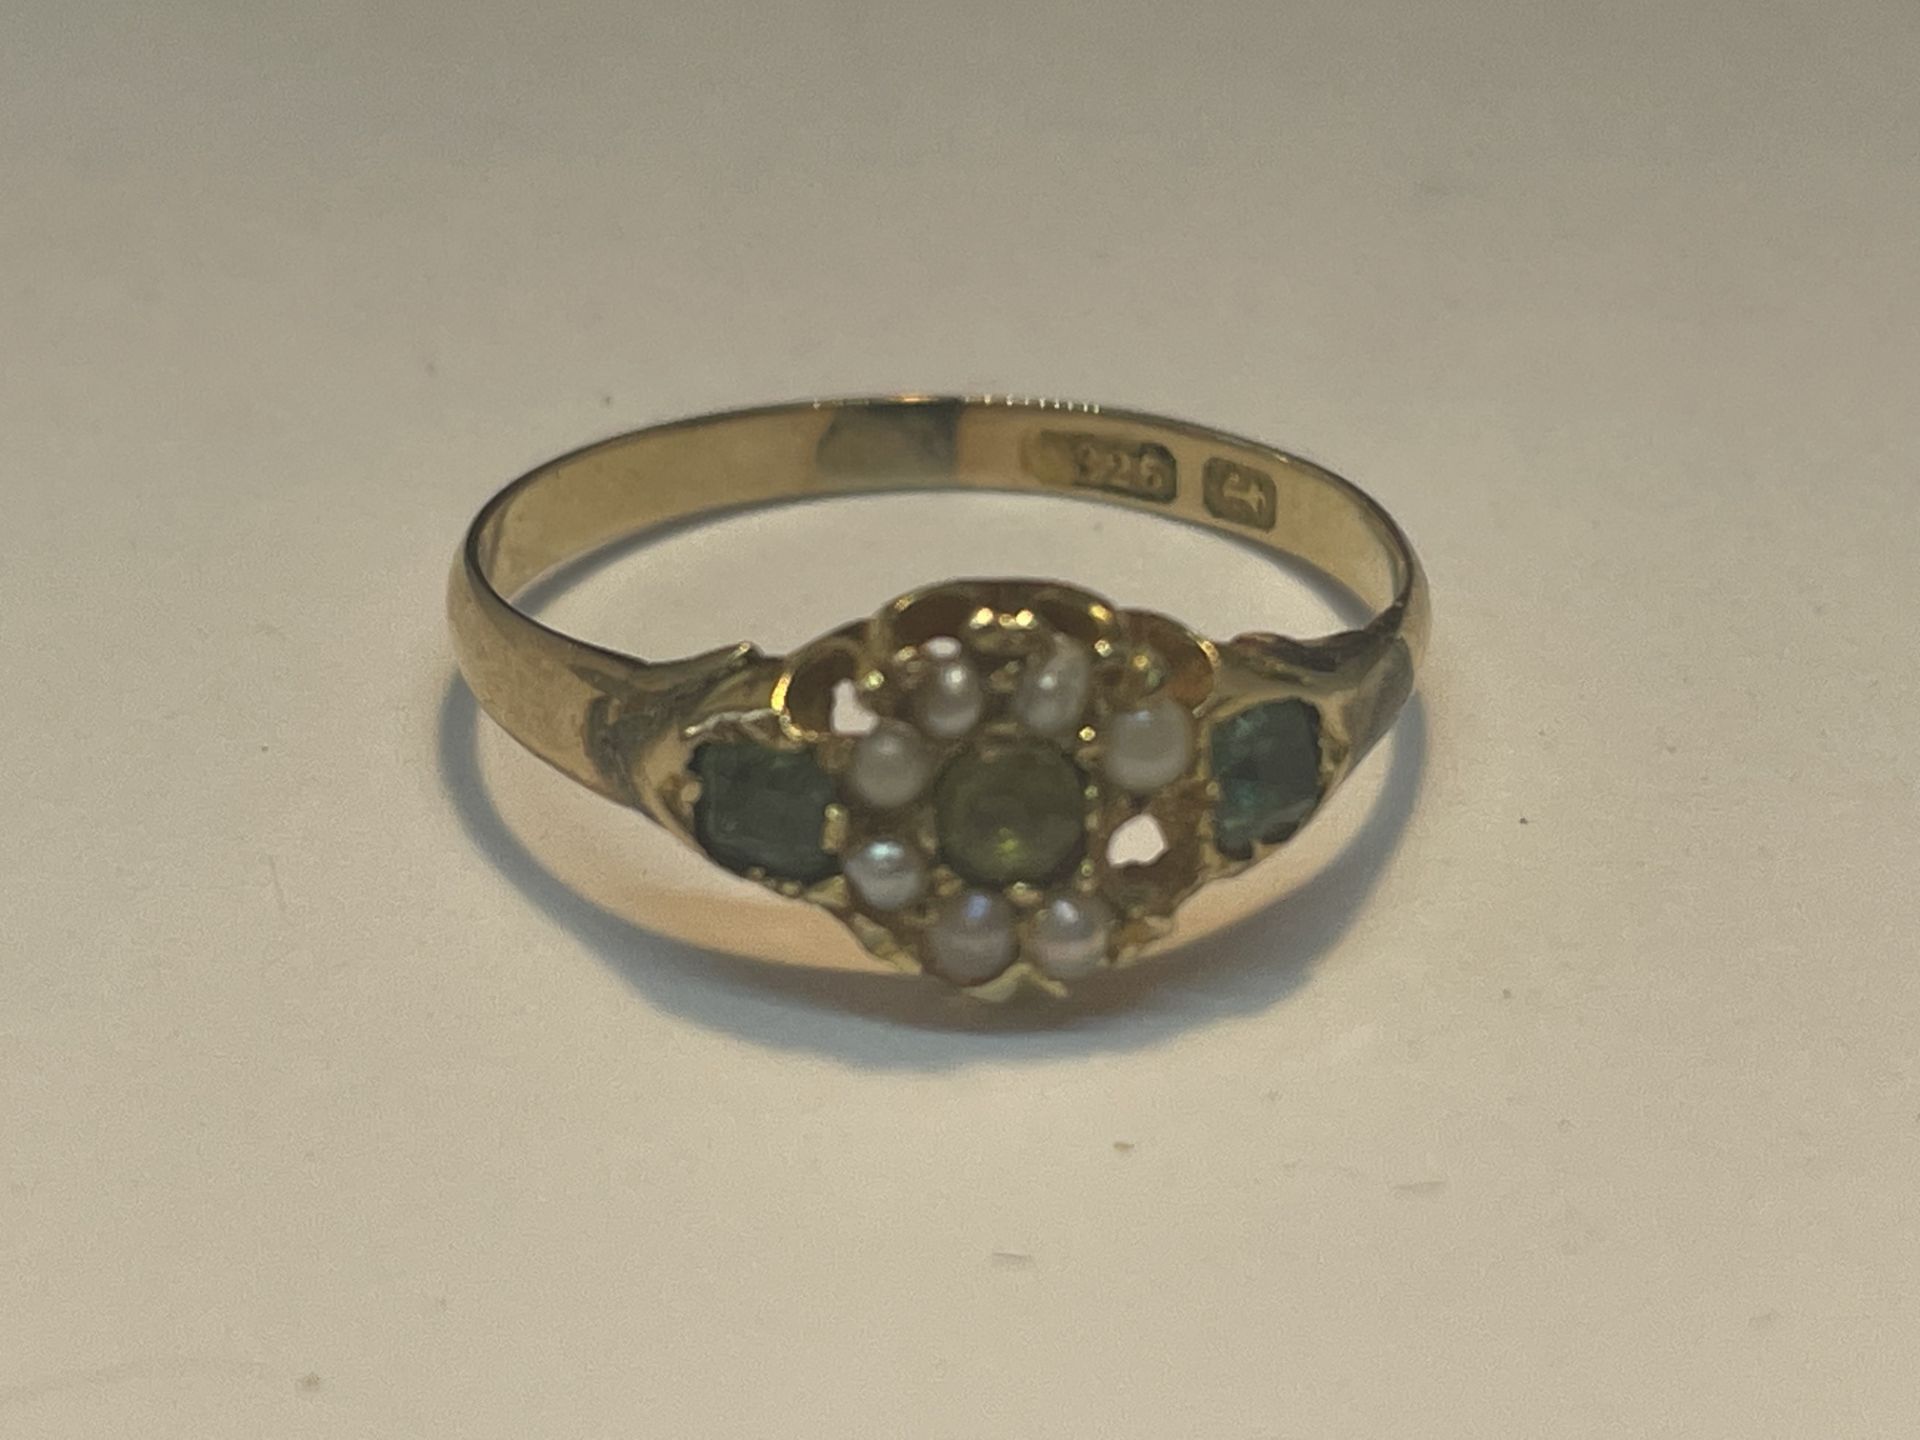 A 15 CARAT ANTIQUE GOLD RING WITH EMERALDS, PEARLS (ONE MISSING) AND PERIDOT GROSS WEIGHT 2.1